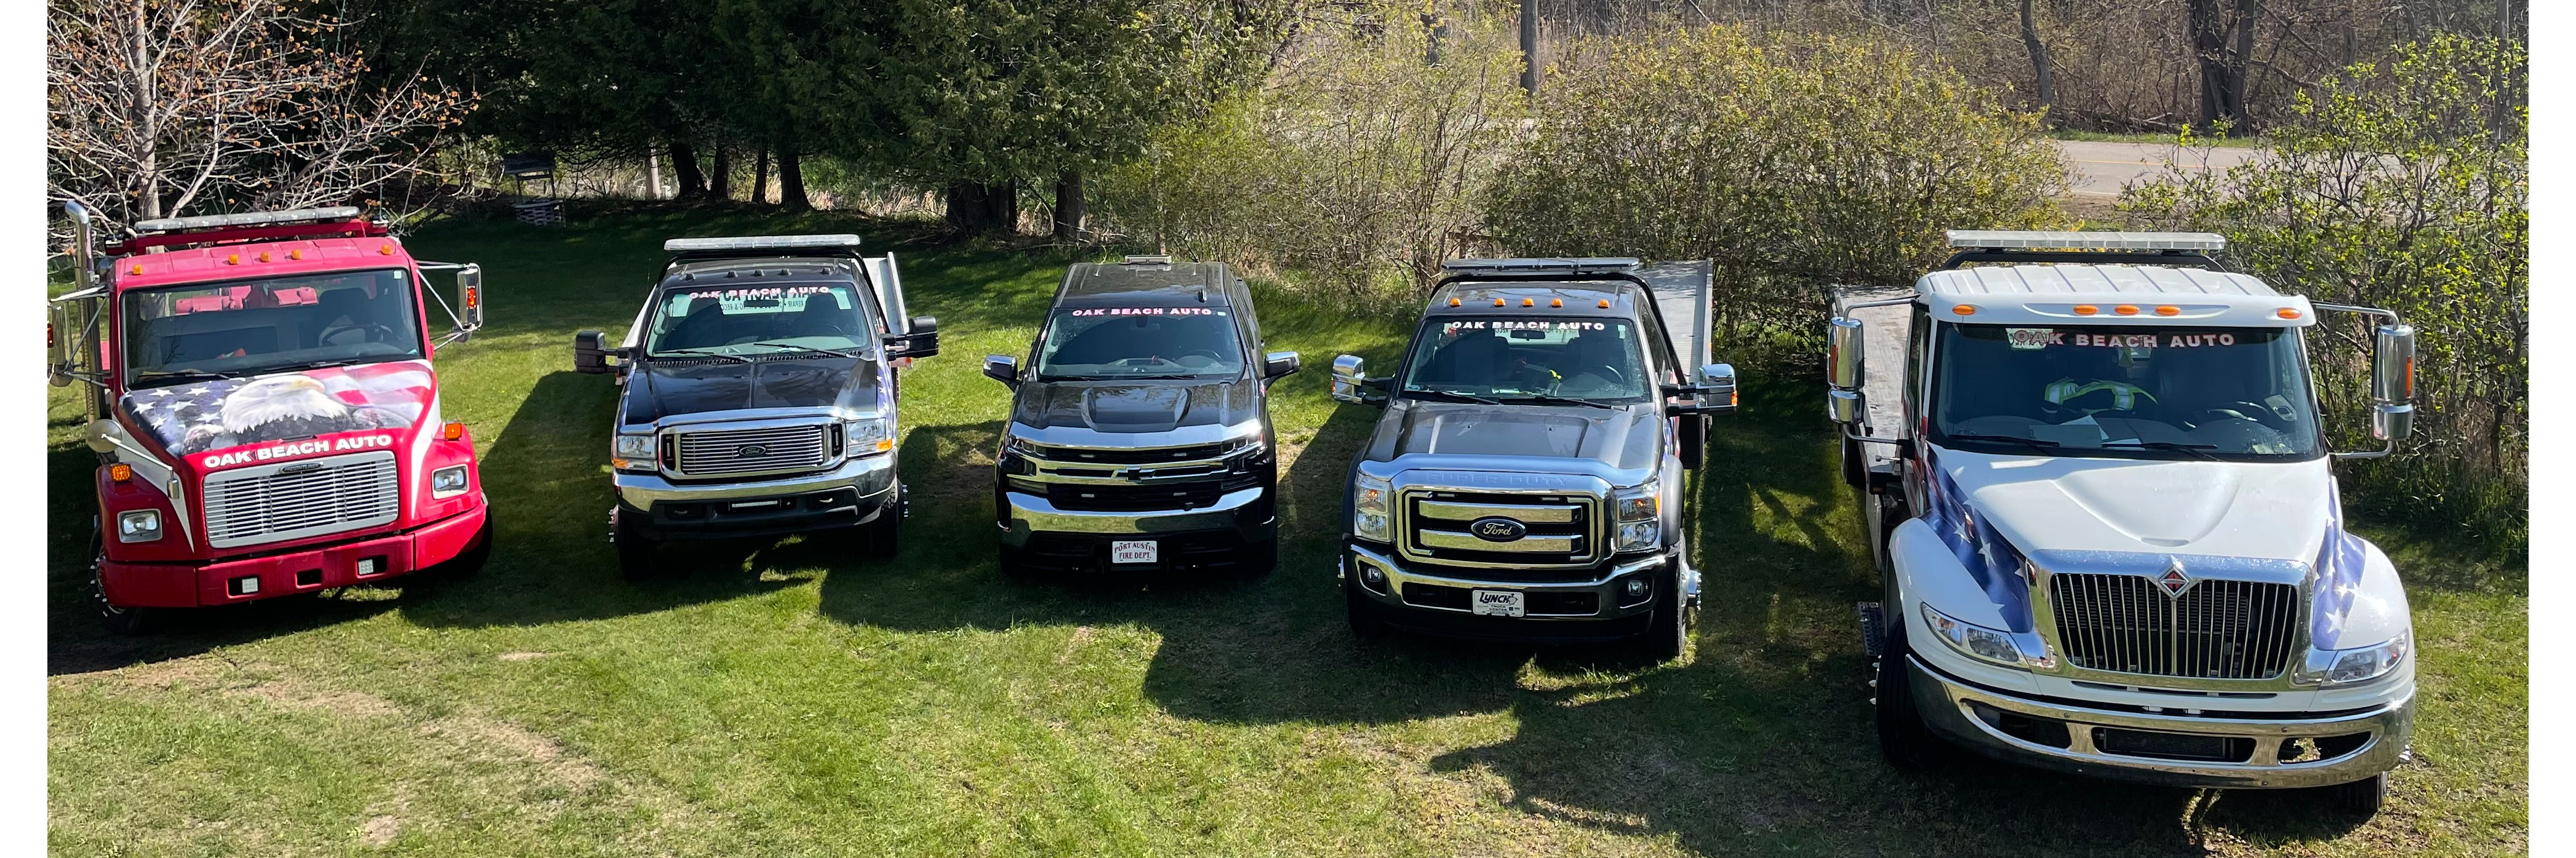 Oak Beach Auto Repair And Towing Towing.com Profile Banner